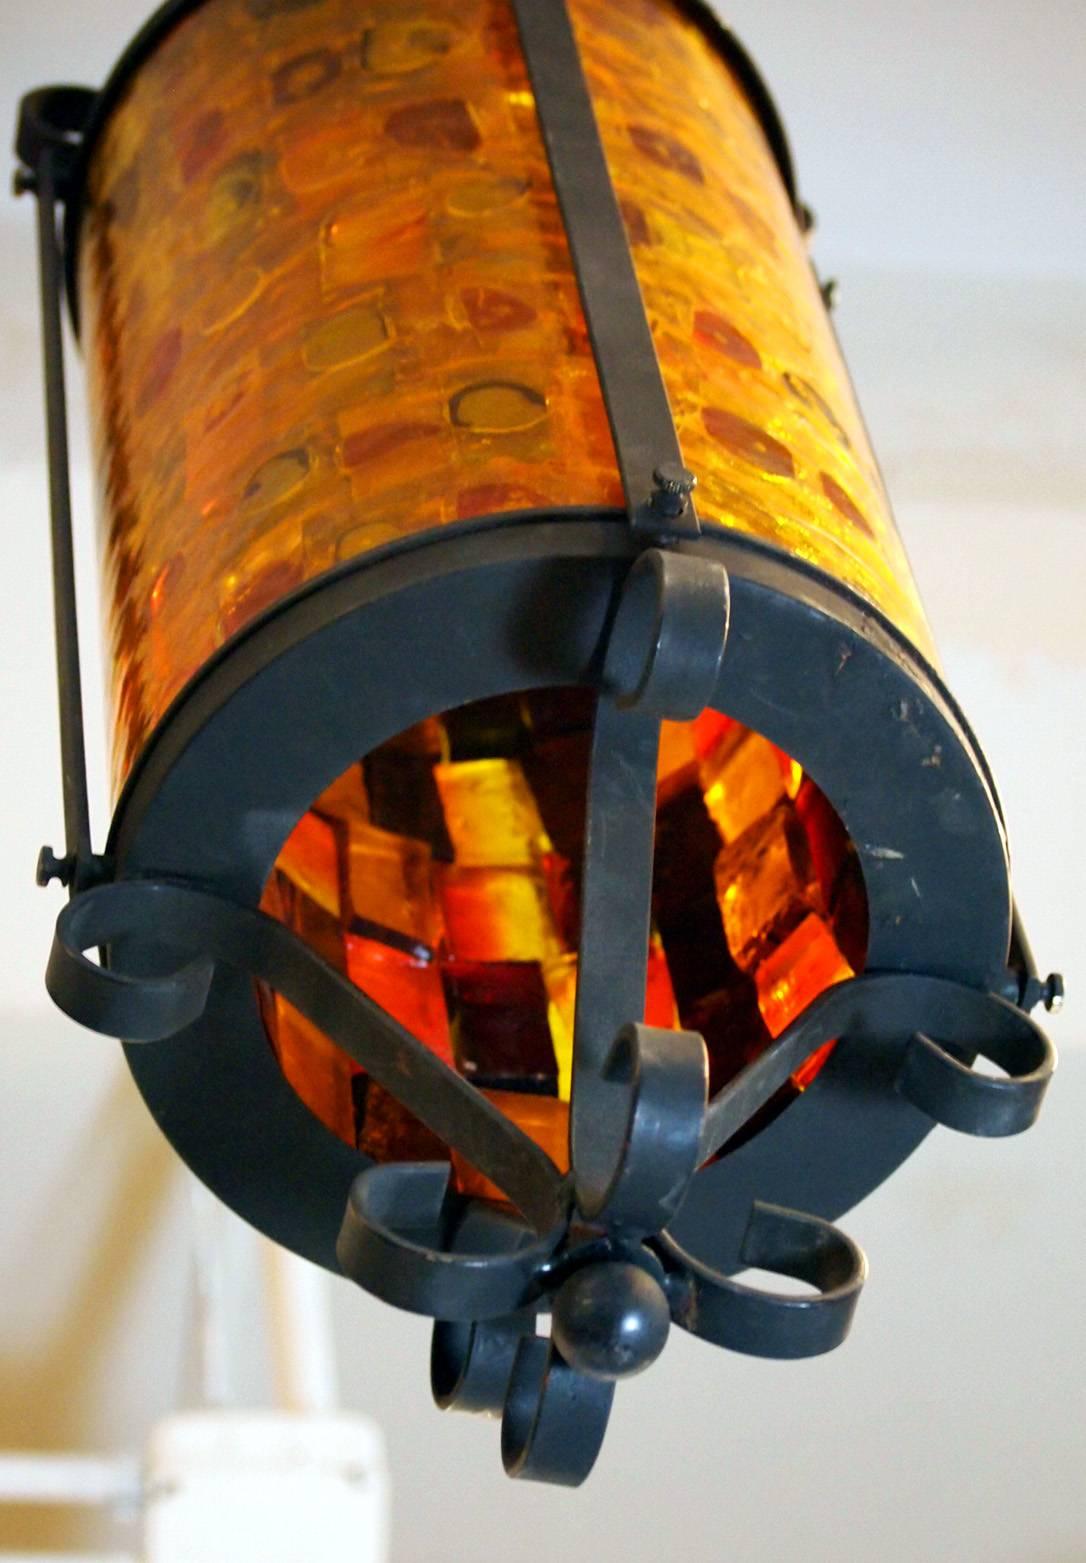 These four vintage cathedral pendant come with multicolored cylindrical glass shades, composed of red, orange and yellow blocks, each set in a metal frame, with metal scroll work, giving the light fixtures a very Gothic appearance. Each requires a